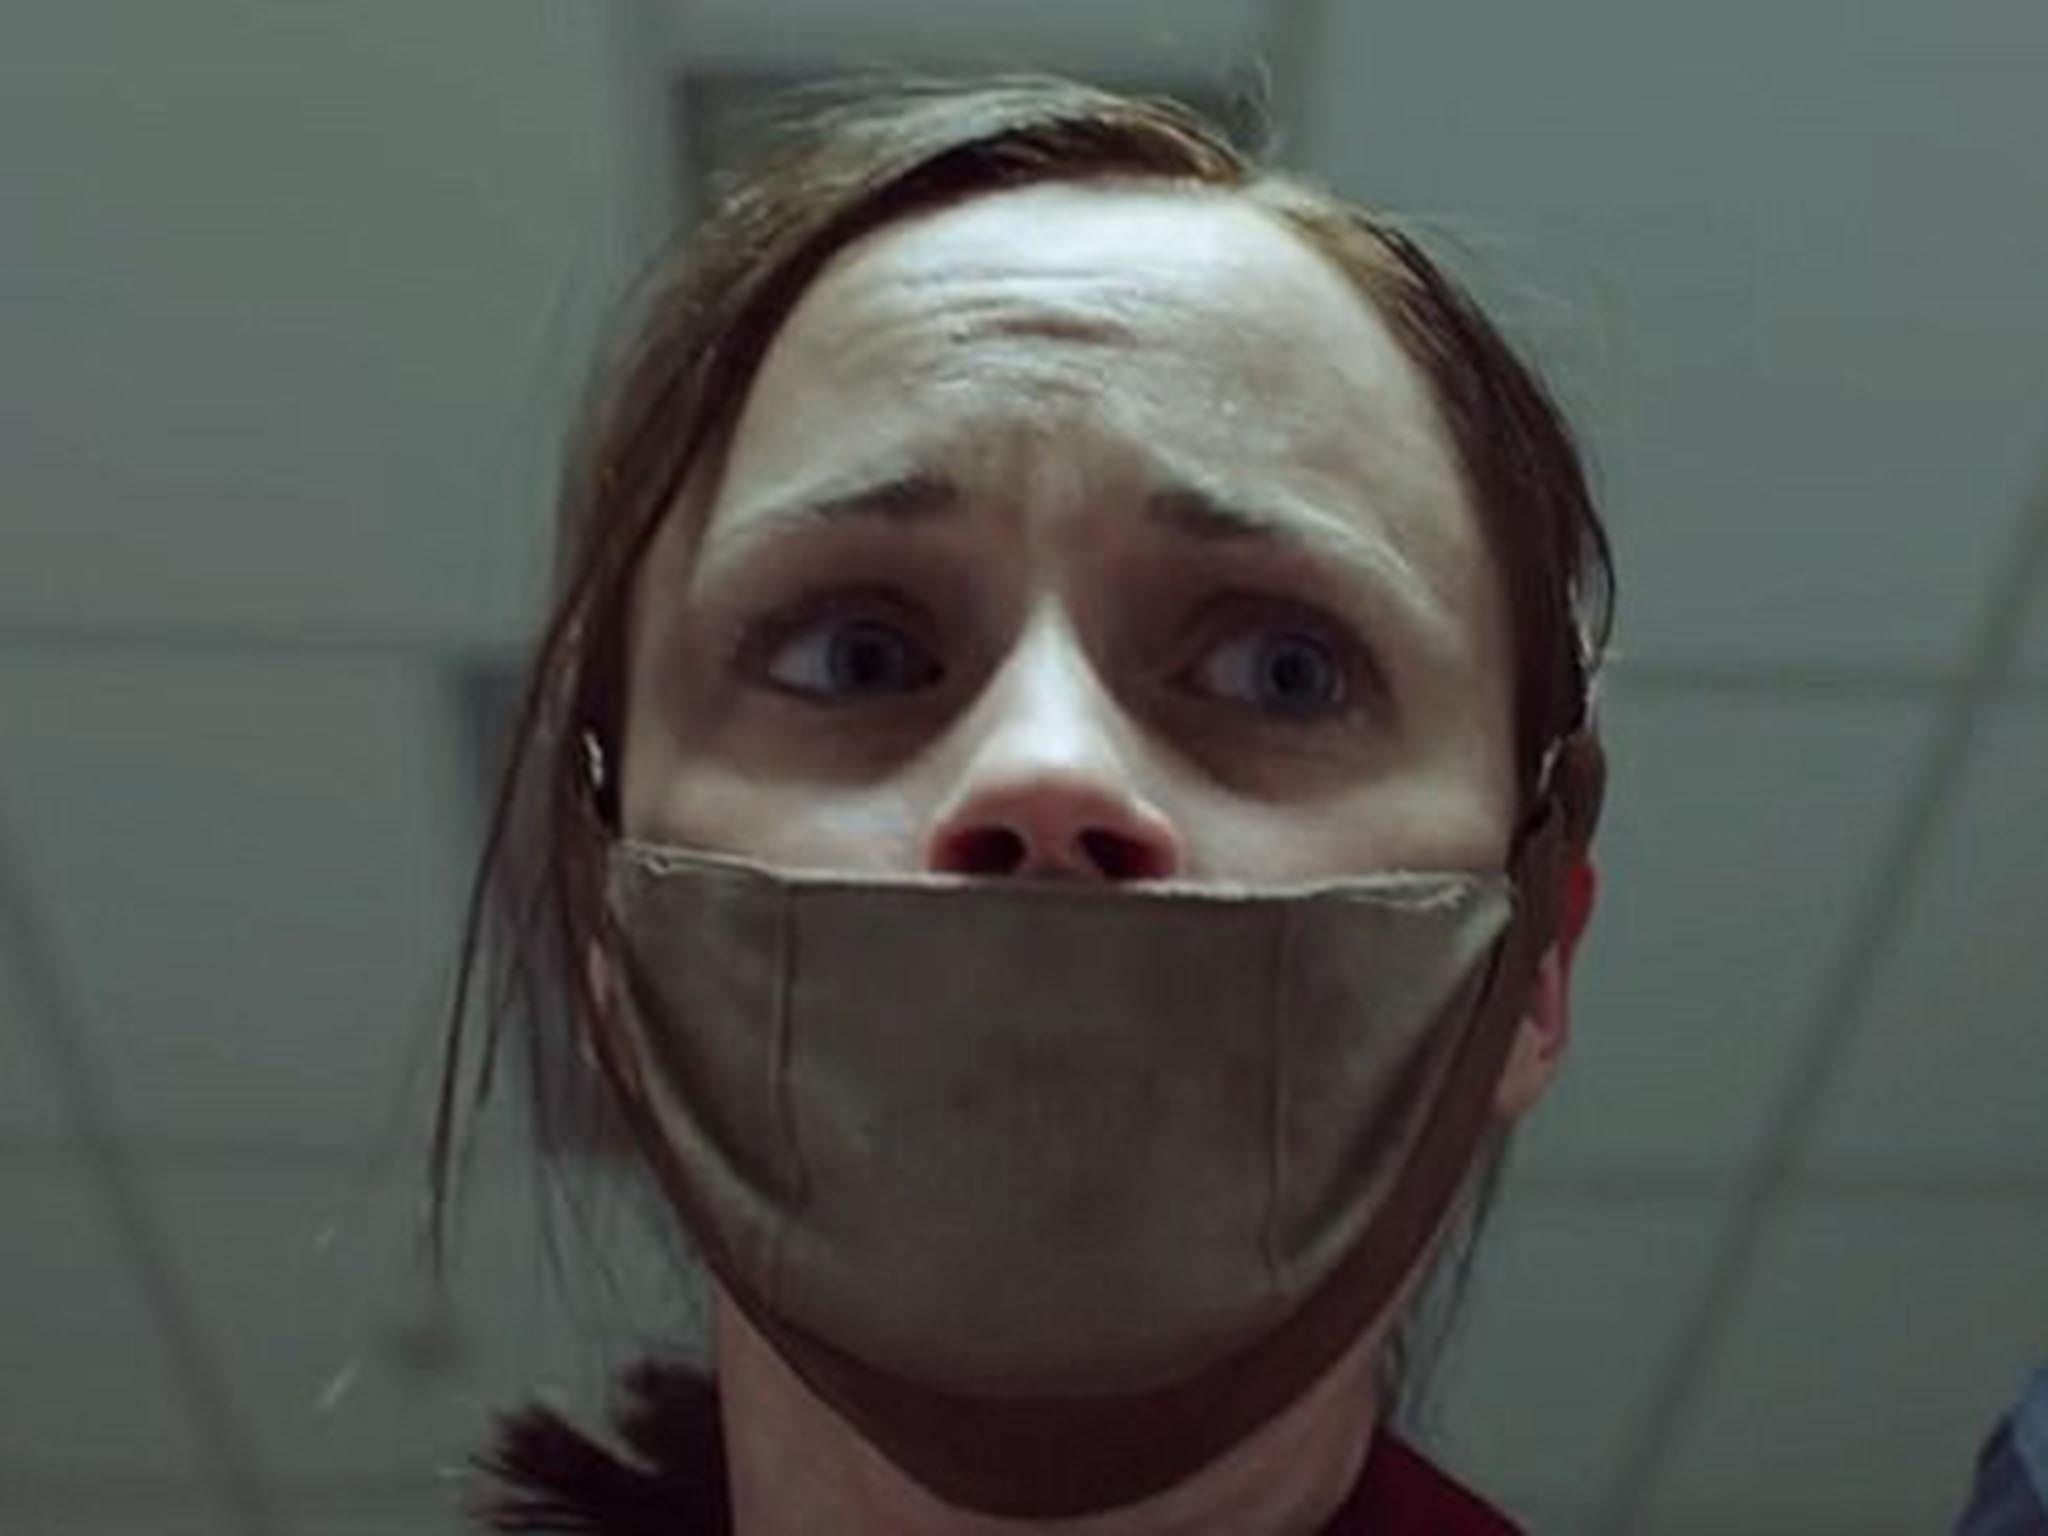 Alexis Bledel plays Ofglen, who is forced into sexual servitude